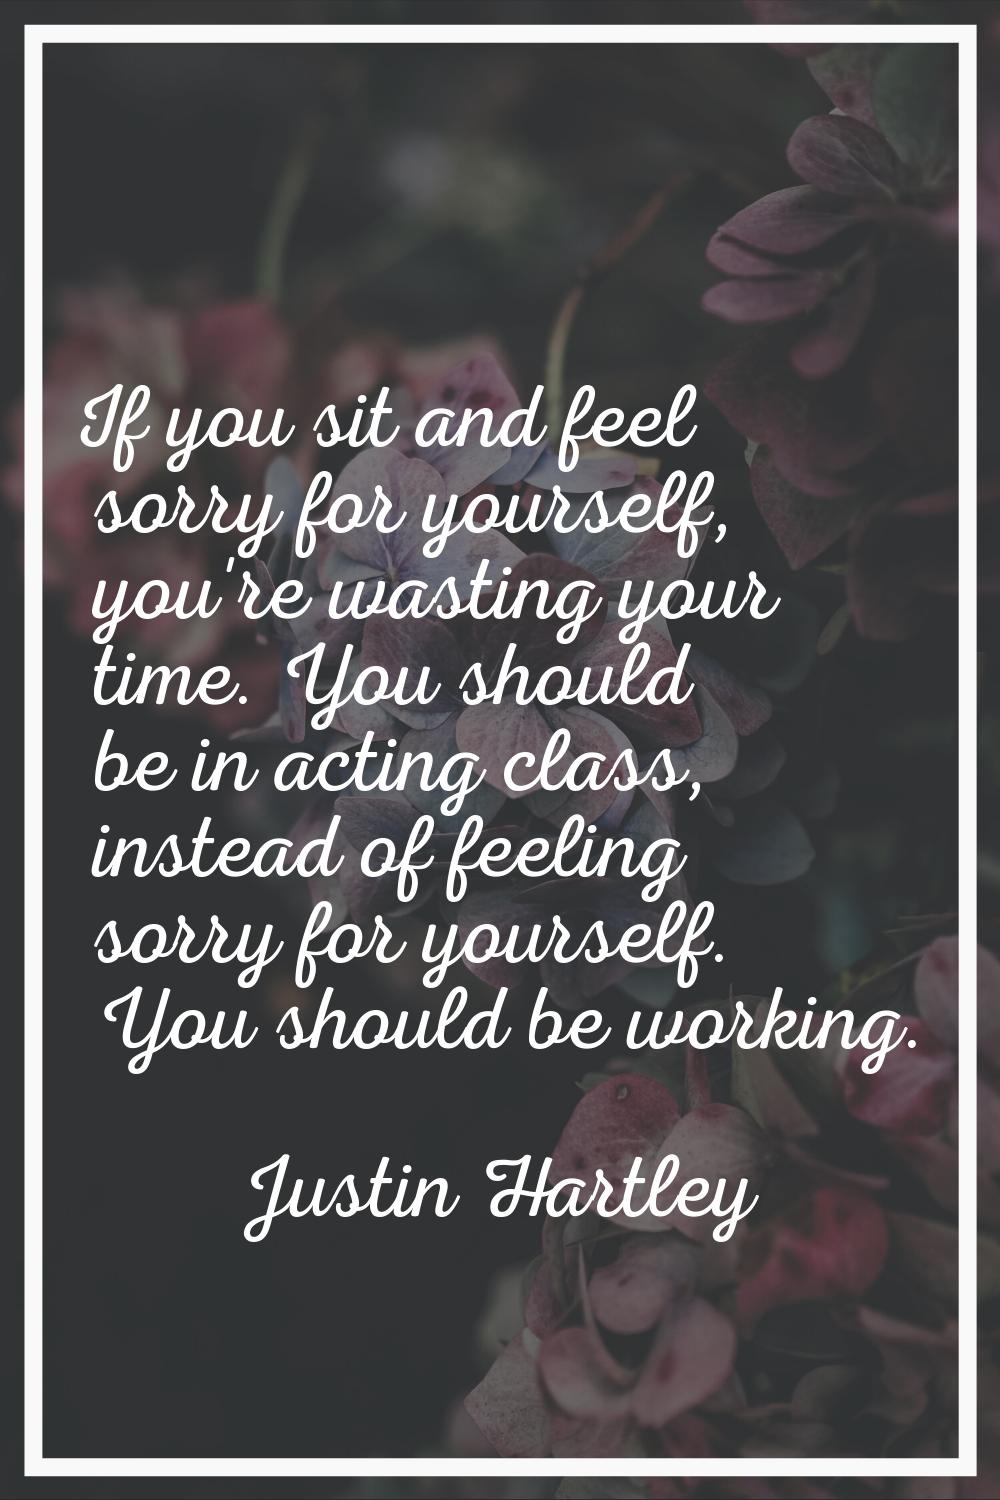 If you sit and feel sorry for yourself, you're wasting your time. You should be in acting class, in